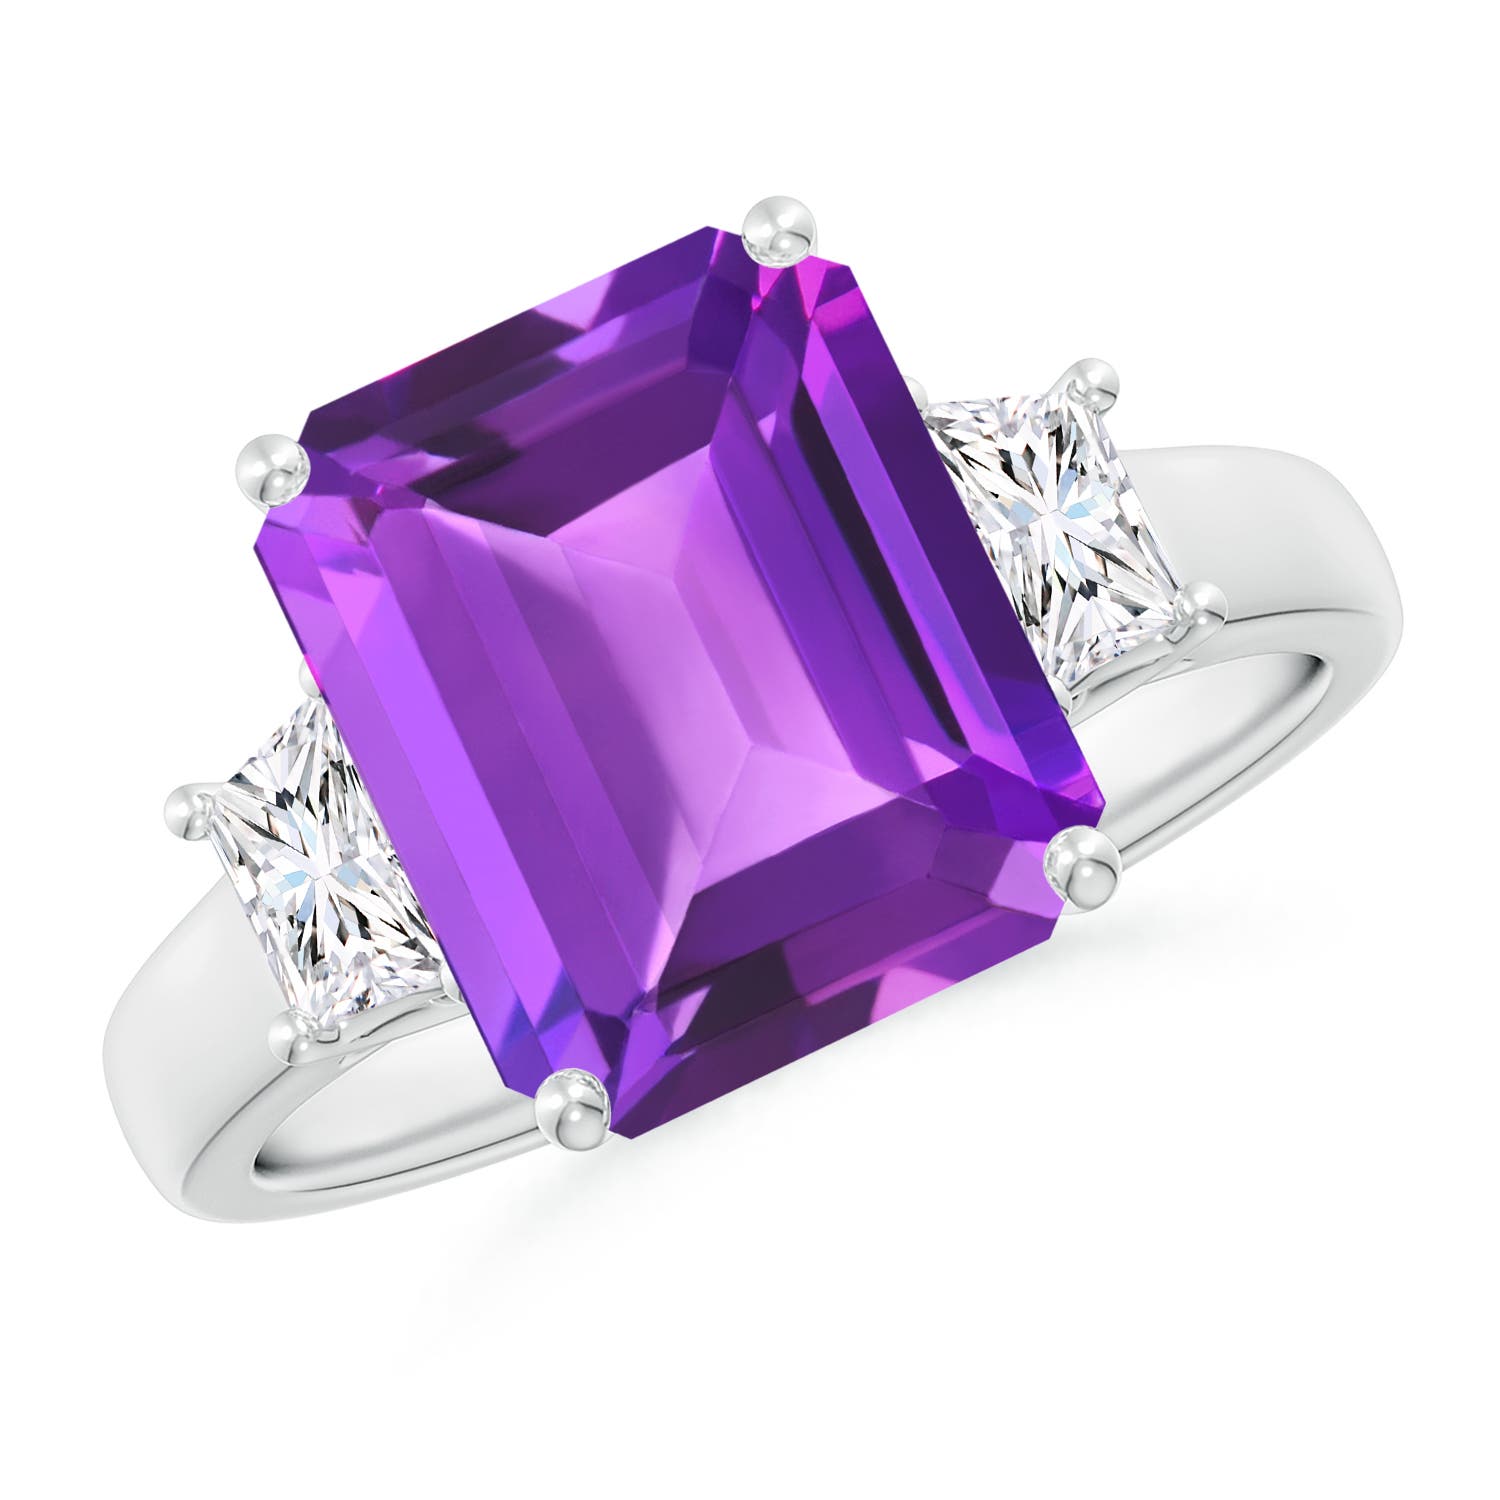 AAA- Amethyst / 4.32 CT / 14 KT White Gold